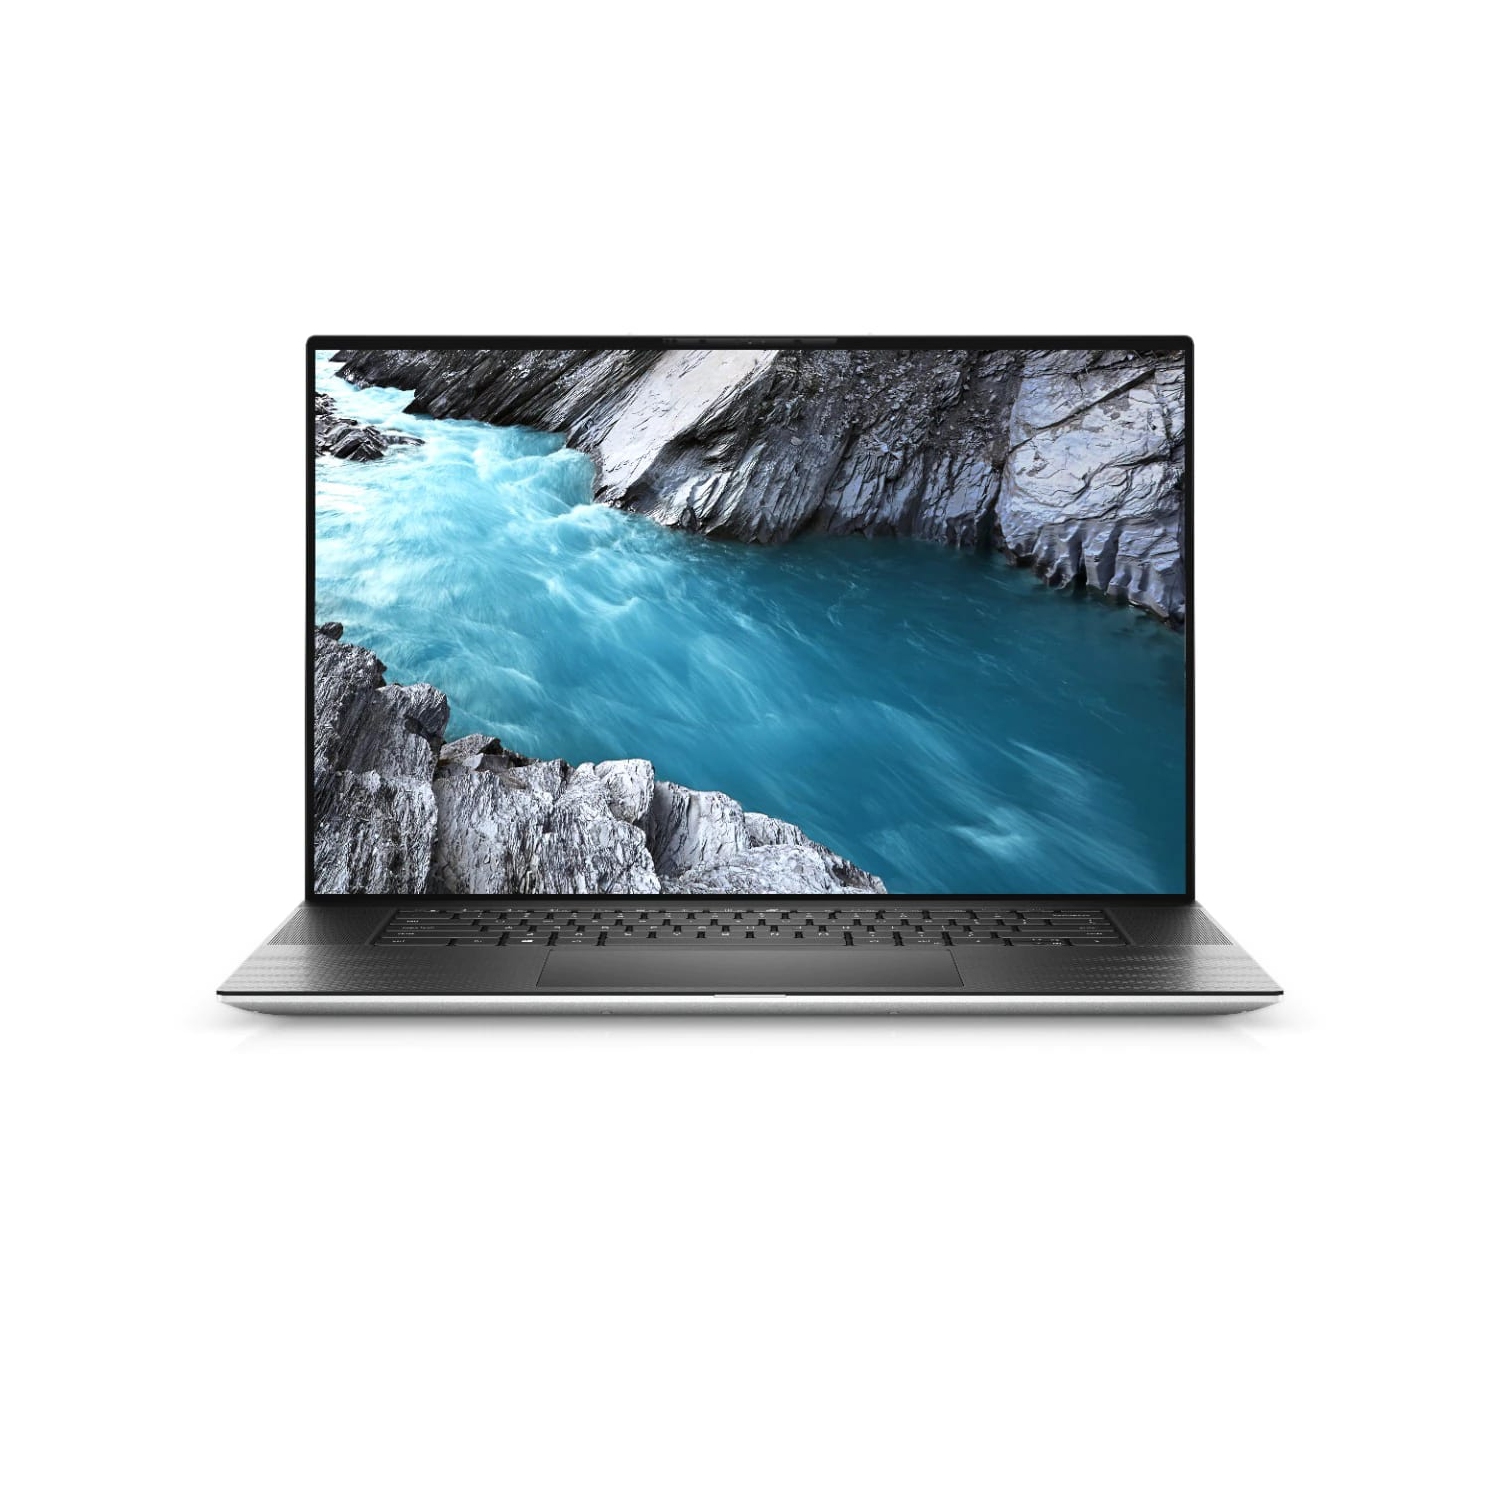 Refurbished (Excellent) - Dell XPS 17 9700 Laptop (2020) | 17" FHD+ | Core i5 - 1TB SSD - 16GB RAM | 4 Cores @ 4.5 GHz - 10th Gen CPU Certified Refurbished